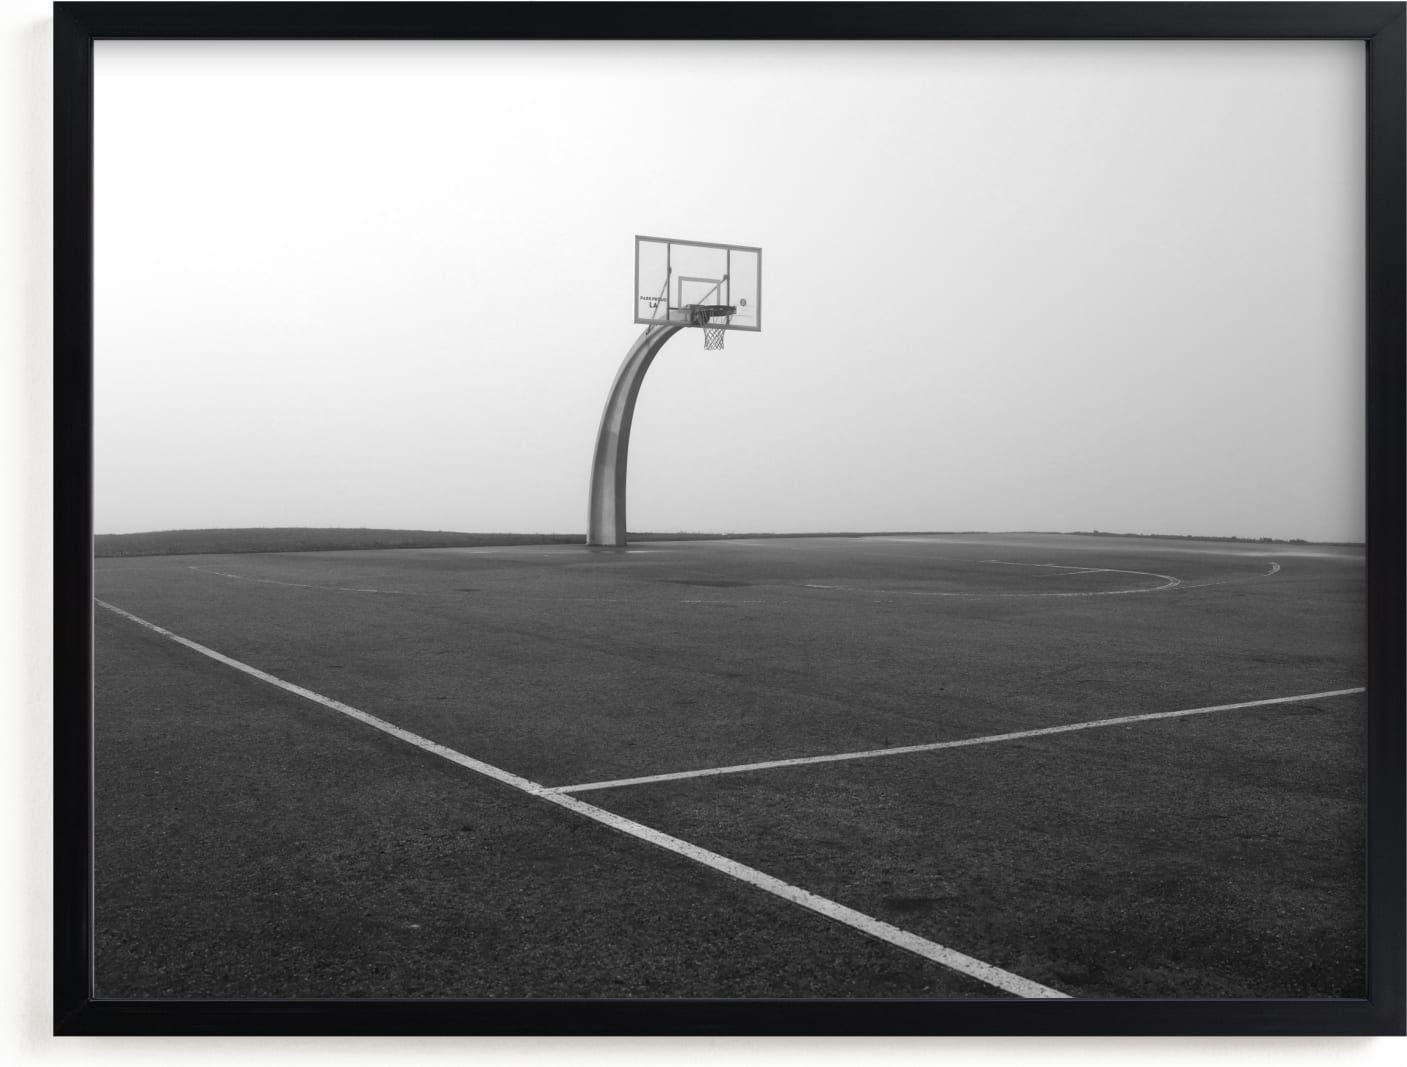 This is a black and white art by Becky Nimoy called Foggy Basketball Court.